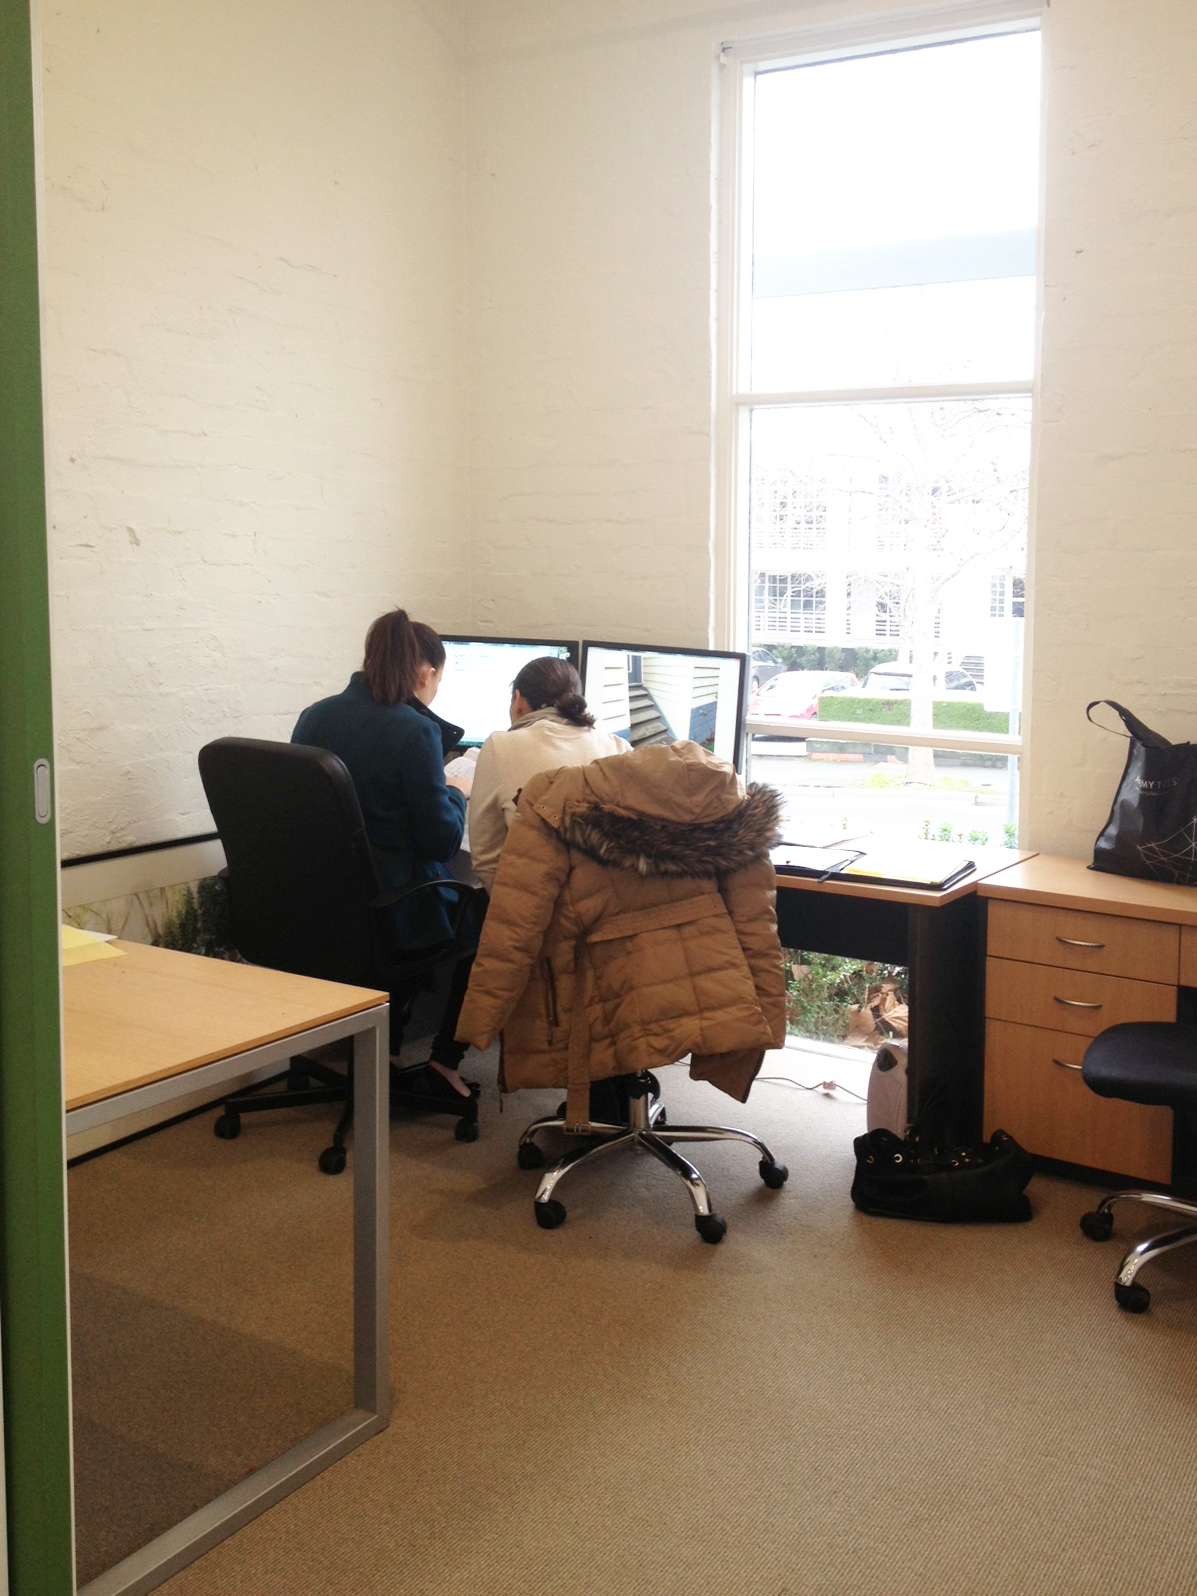 Ian Barker Gardens new office at 216 Canterbury Road, Canterbury - Design Manager Bethany's office.